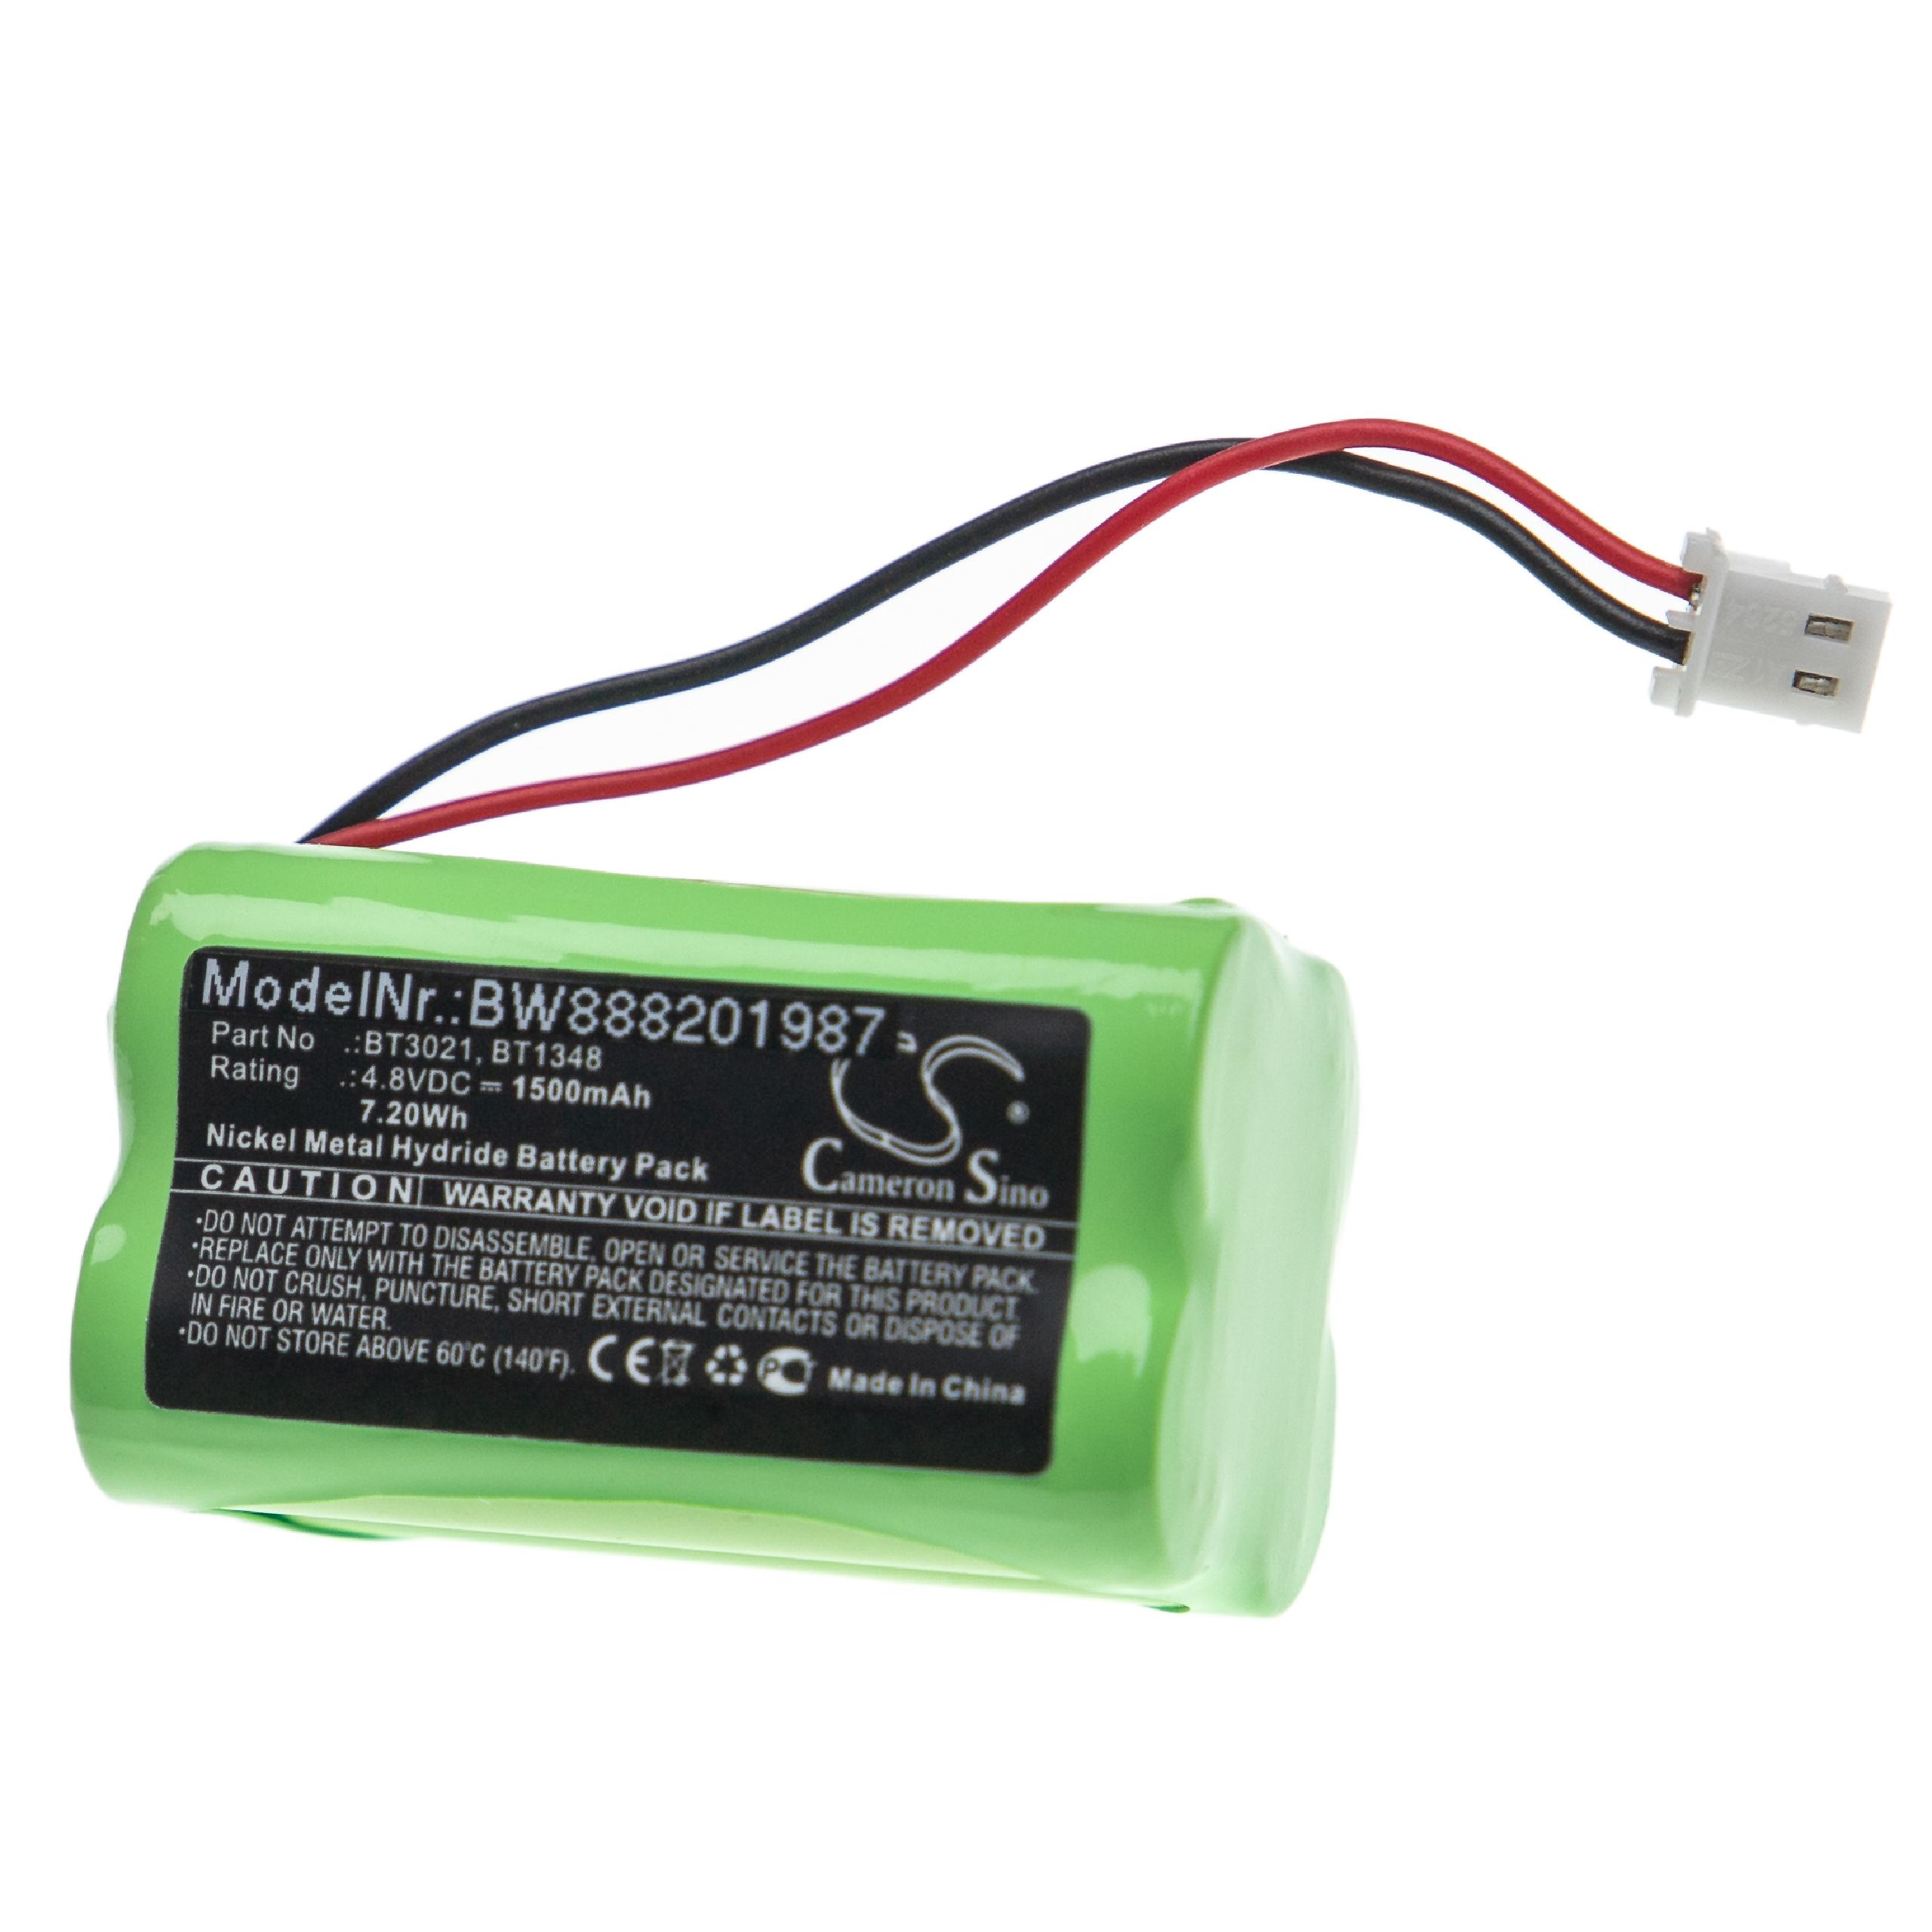 Alarm System Battery Replacement for Commpact BT1348, BT3021 - 1500mAh 4.8V NiMH